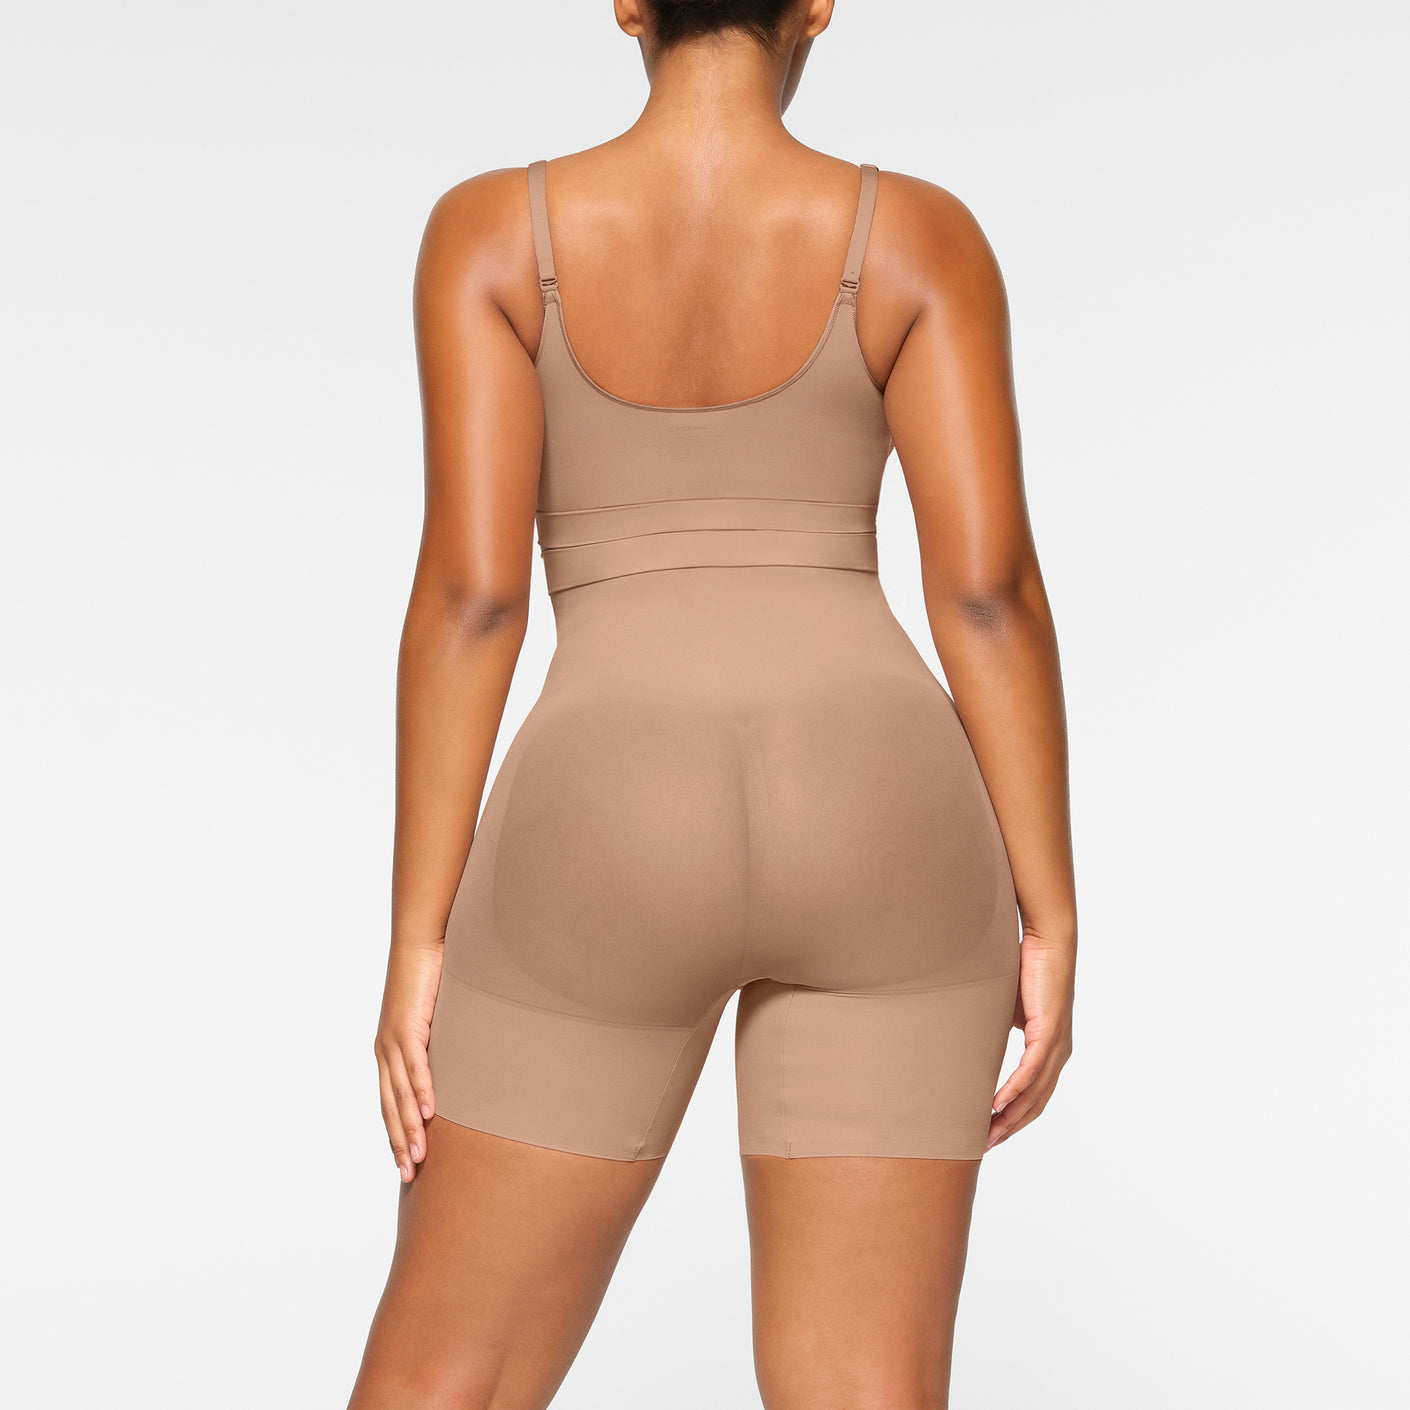 Skims High Waisted Briefs and Mid Thigh Shorts Bundle, Size L/XL, Color  Sienna